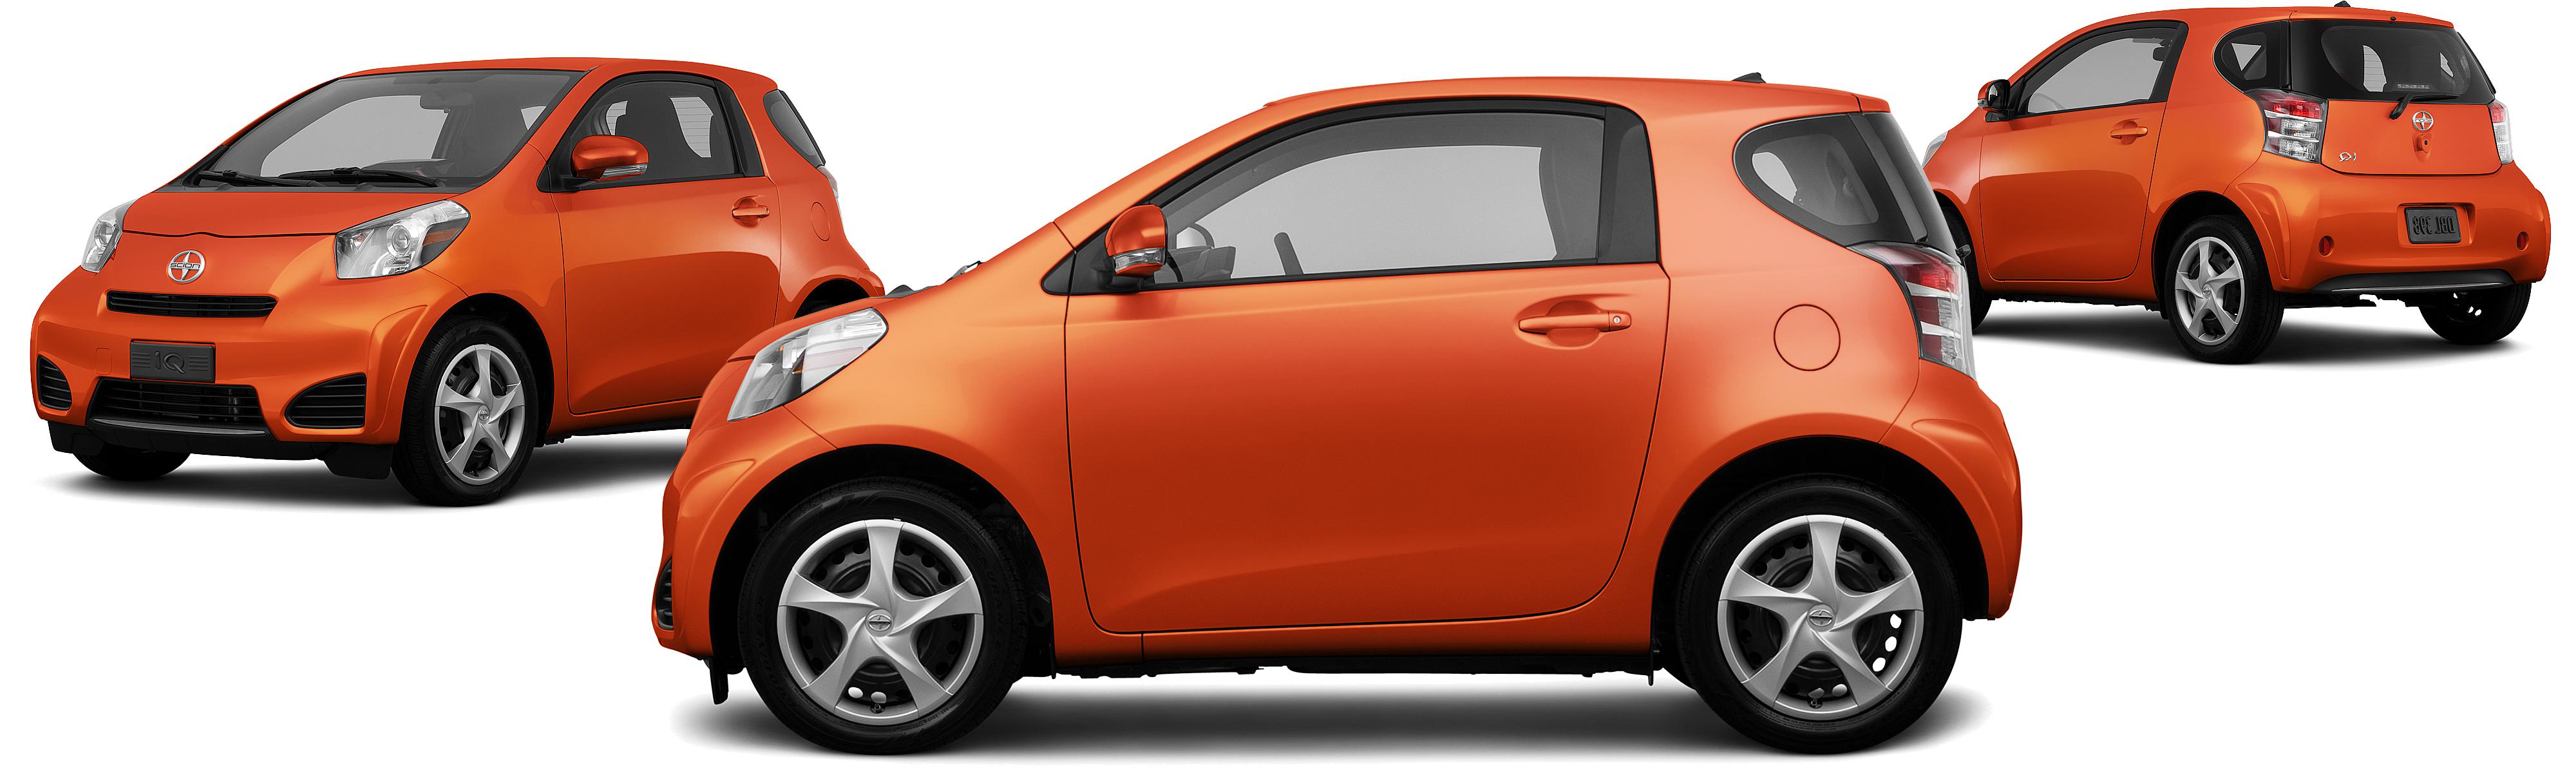 2013 Scion iQ 2dr Hatchback - Research - GrooveCar